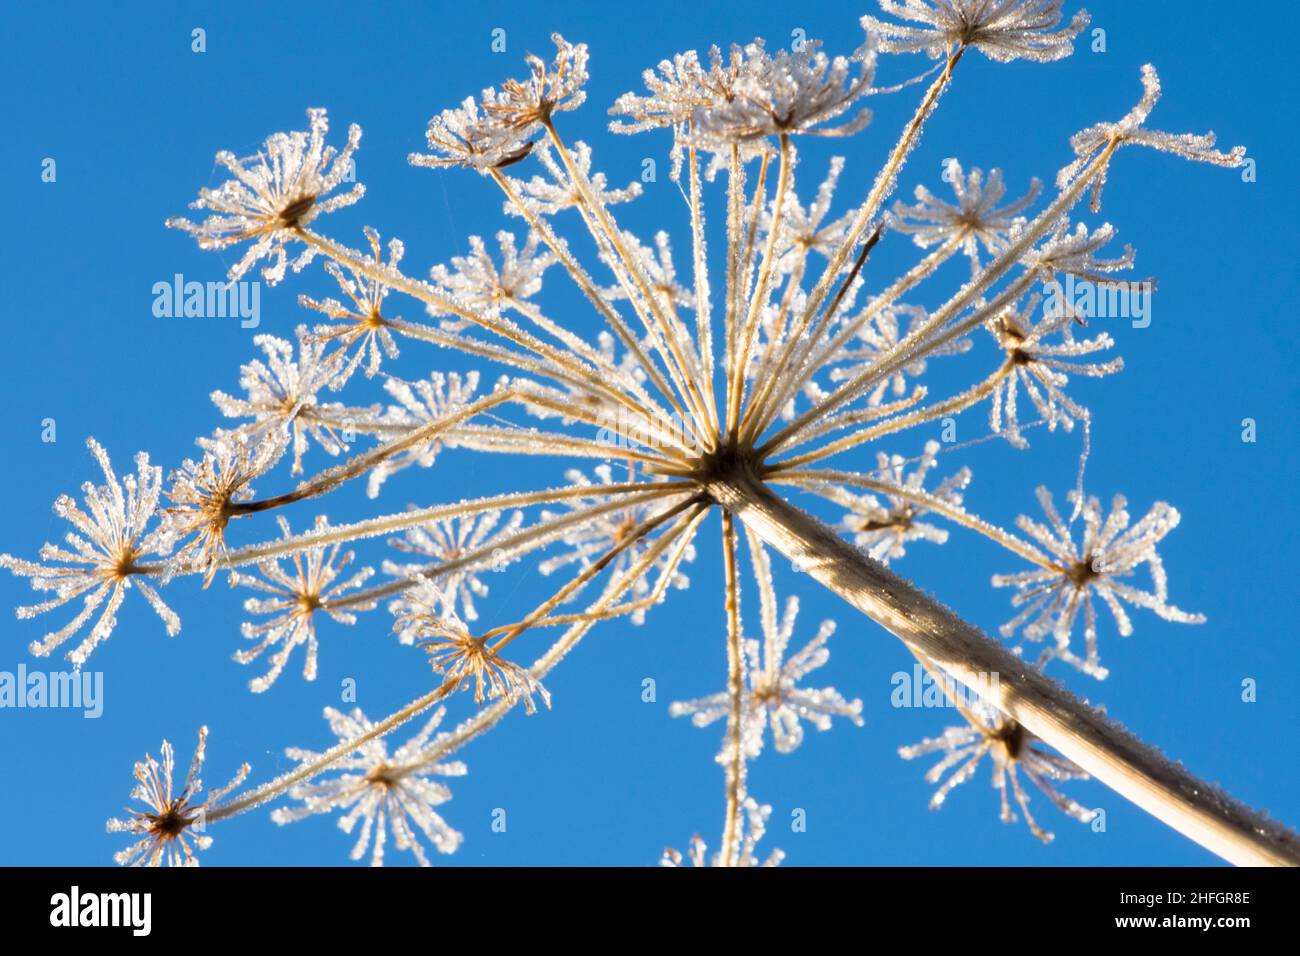 Common Hogweed, Heracleum sphondylium, Cow parsnip, seed head flower head covered with frost sparkling  against a blue sky January, Sussex, UK Stock Photo